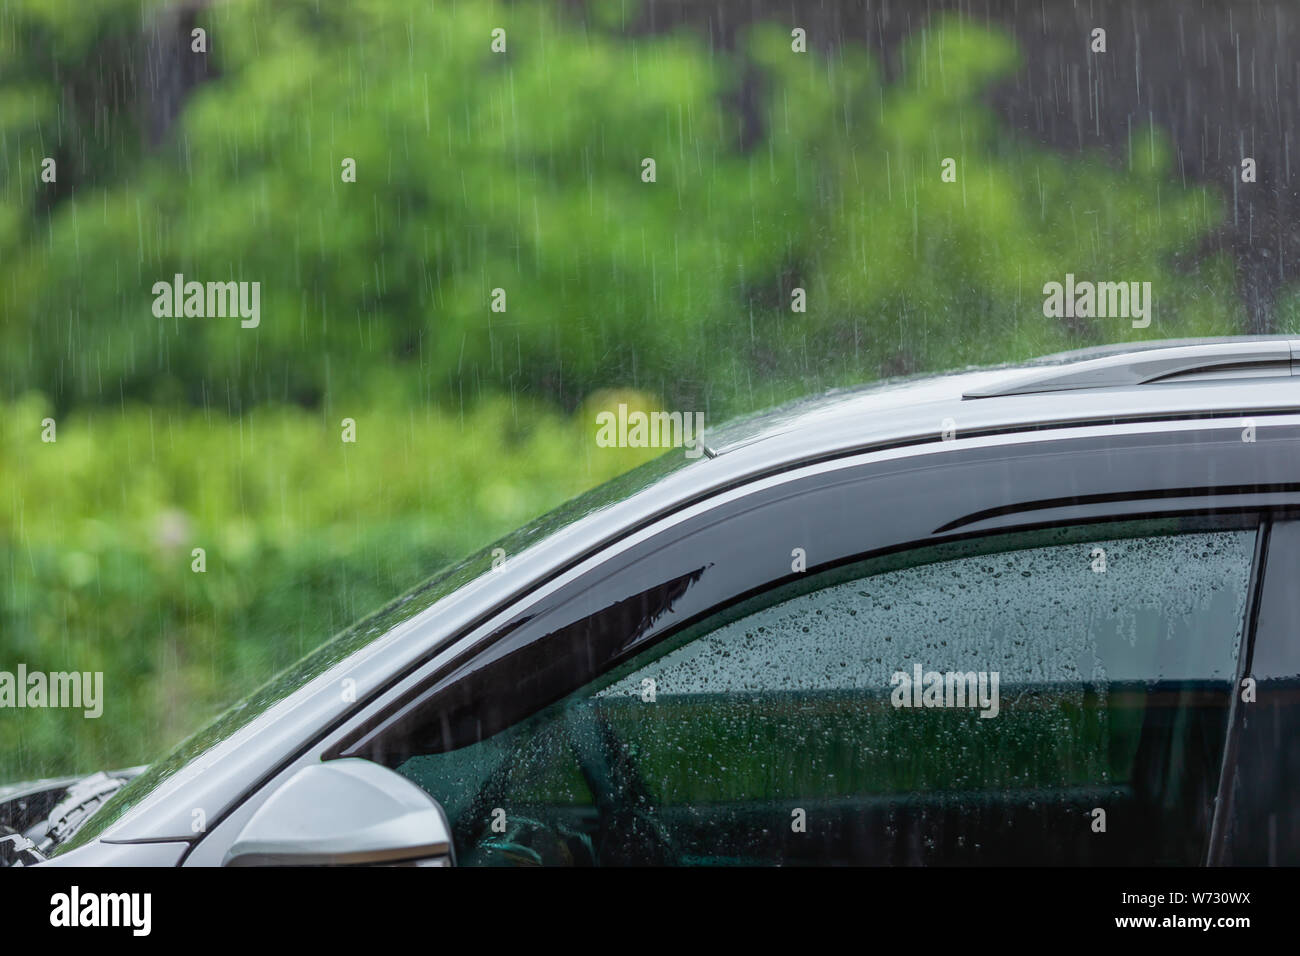 Roof of modern car parking at outdoor while raining, How to take care the car in rainy season concept Stock Photo